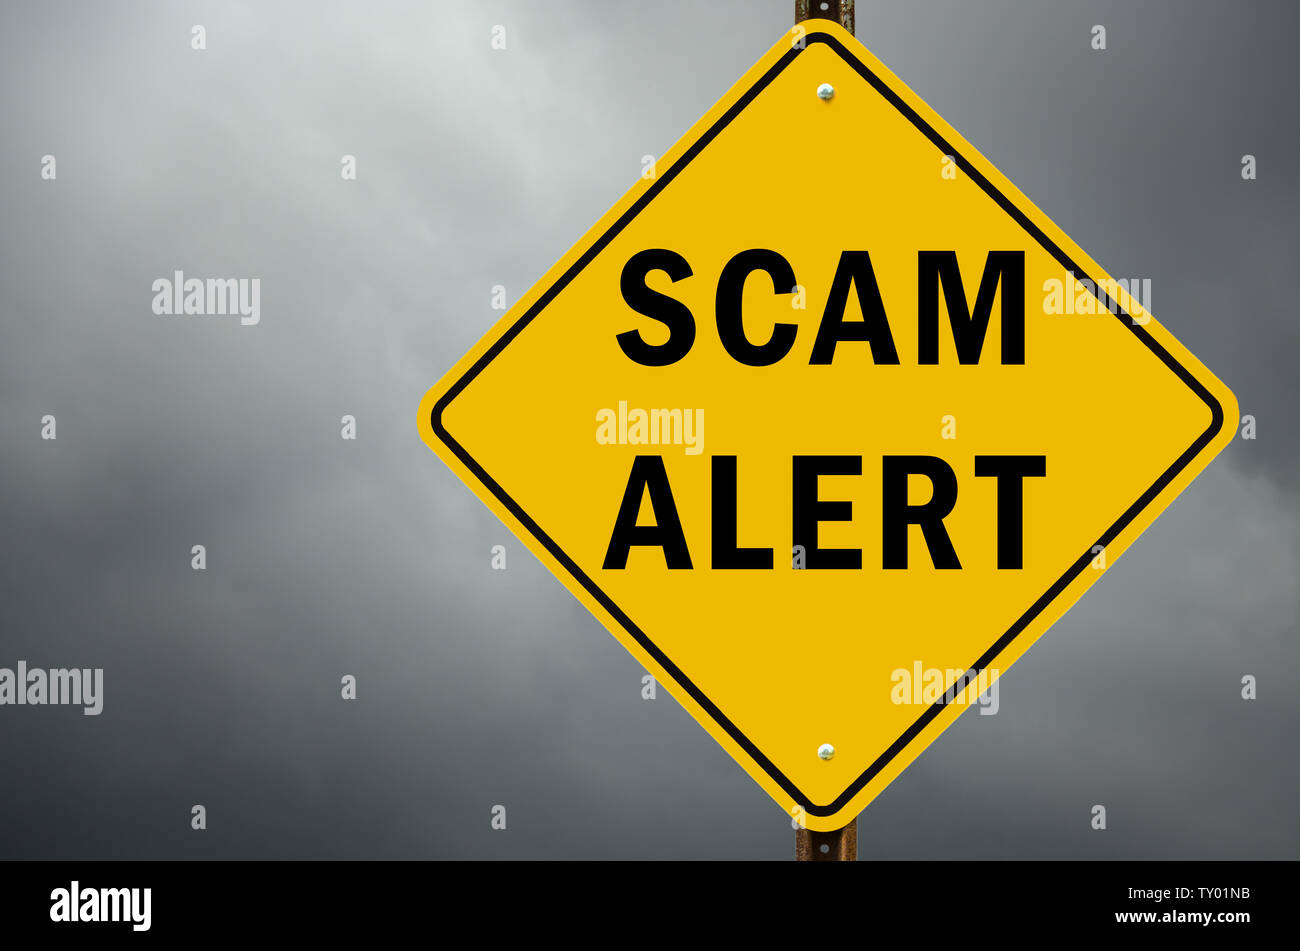 Conceptual road sign against a stormy sky saying Scam Alert Stock Photo